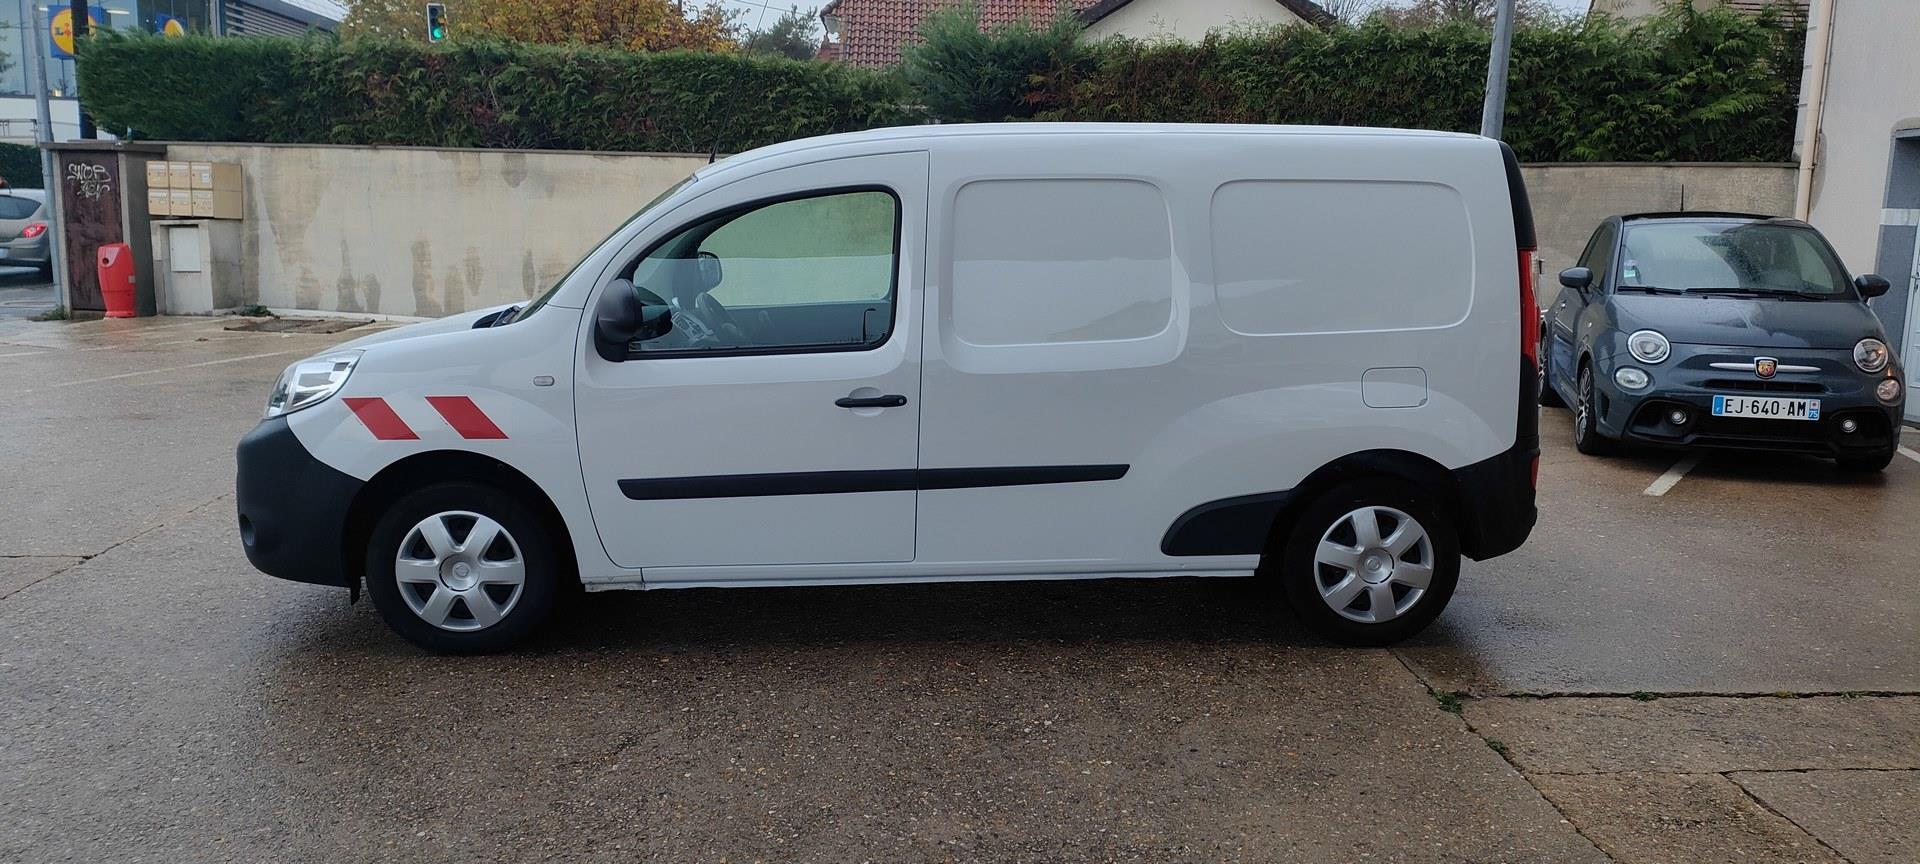 Renault KANGOO EXPRESS II (2) EXTRA R-LINK ENERGY DCI 90 E6 - Site Officiel  Ford [concession] Véhicules d'Occasion [ville]